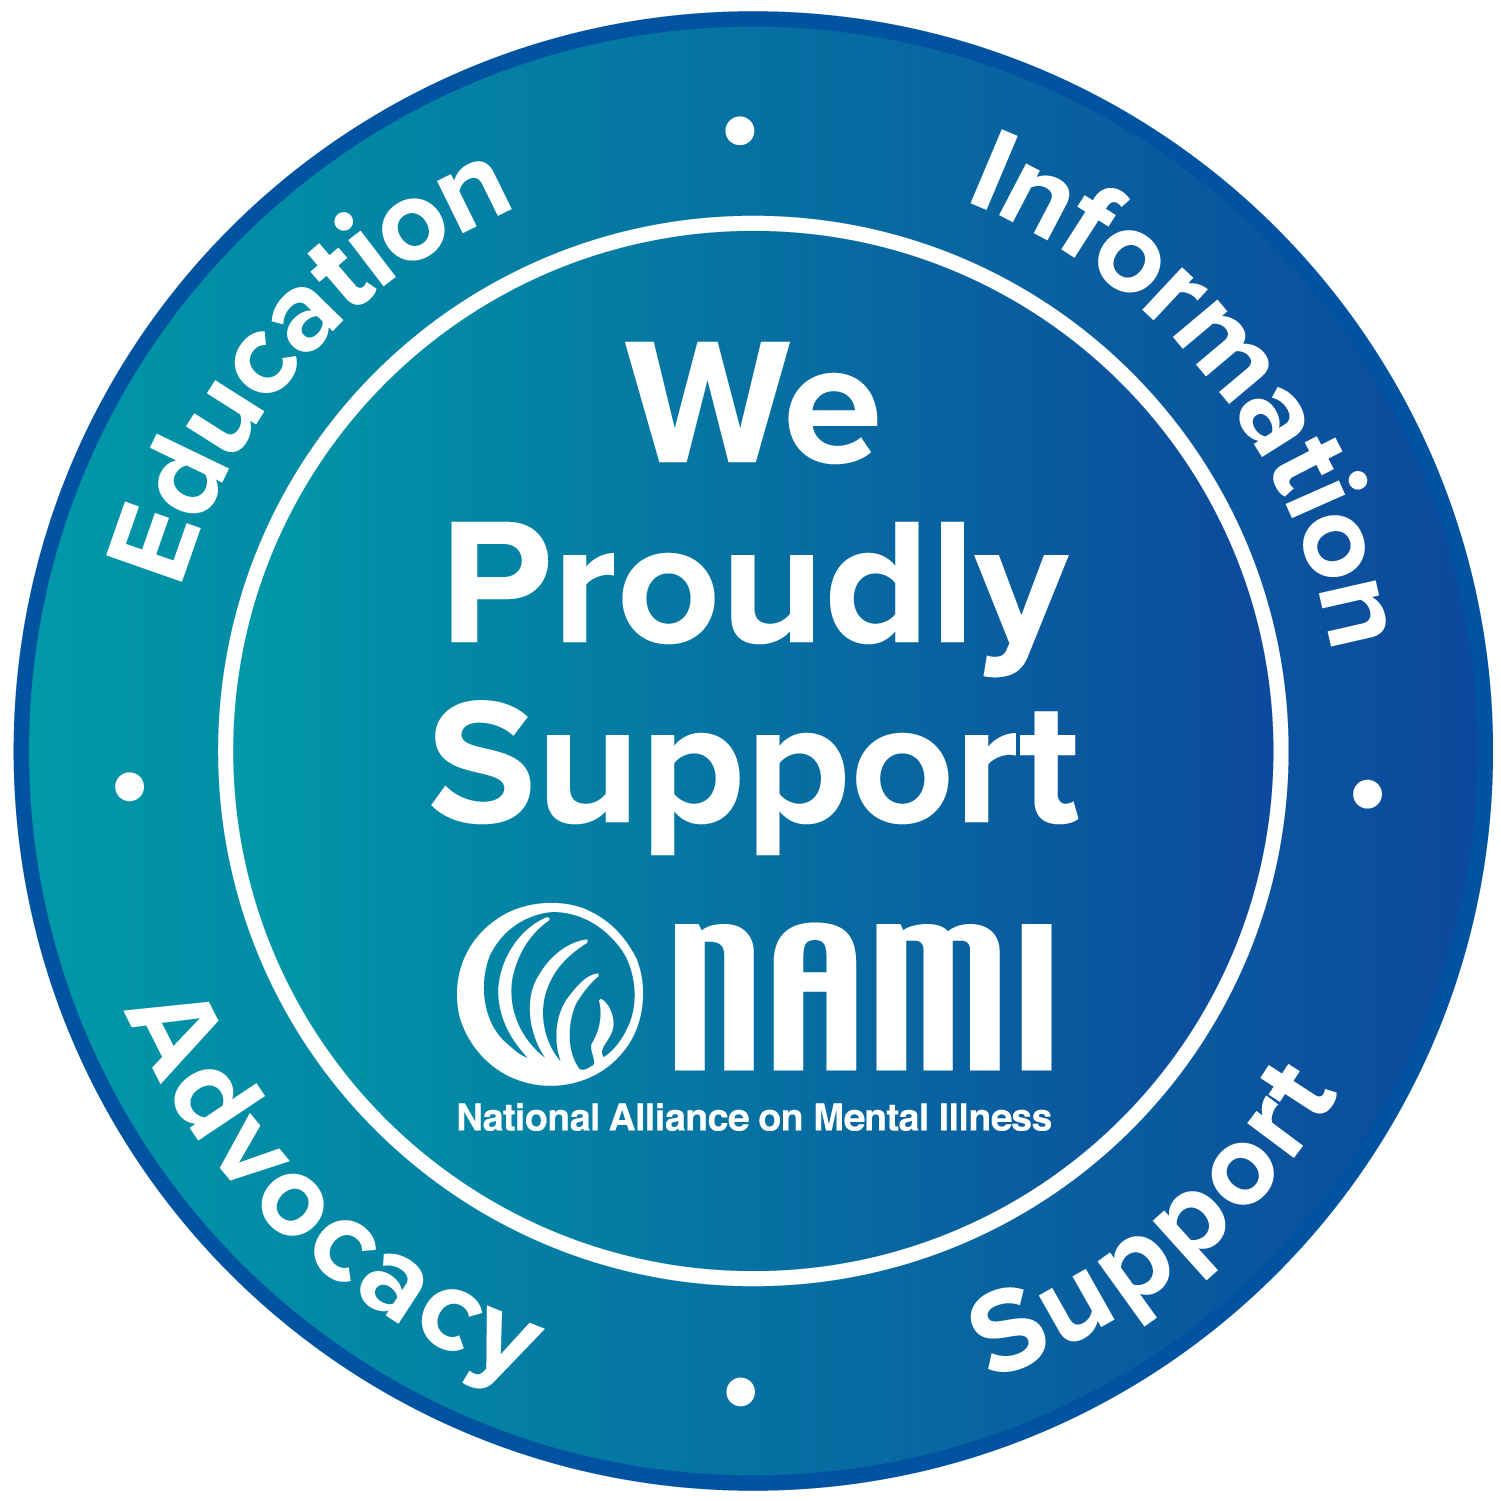 We Proudly Support NAMI